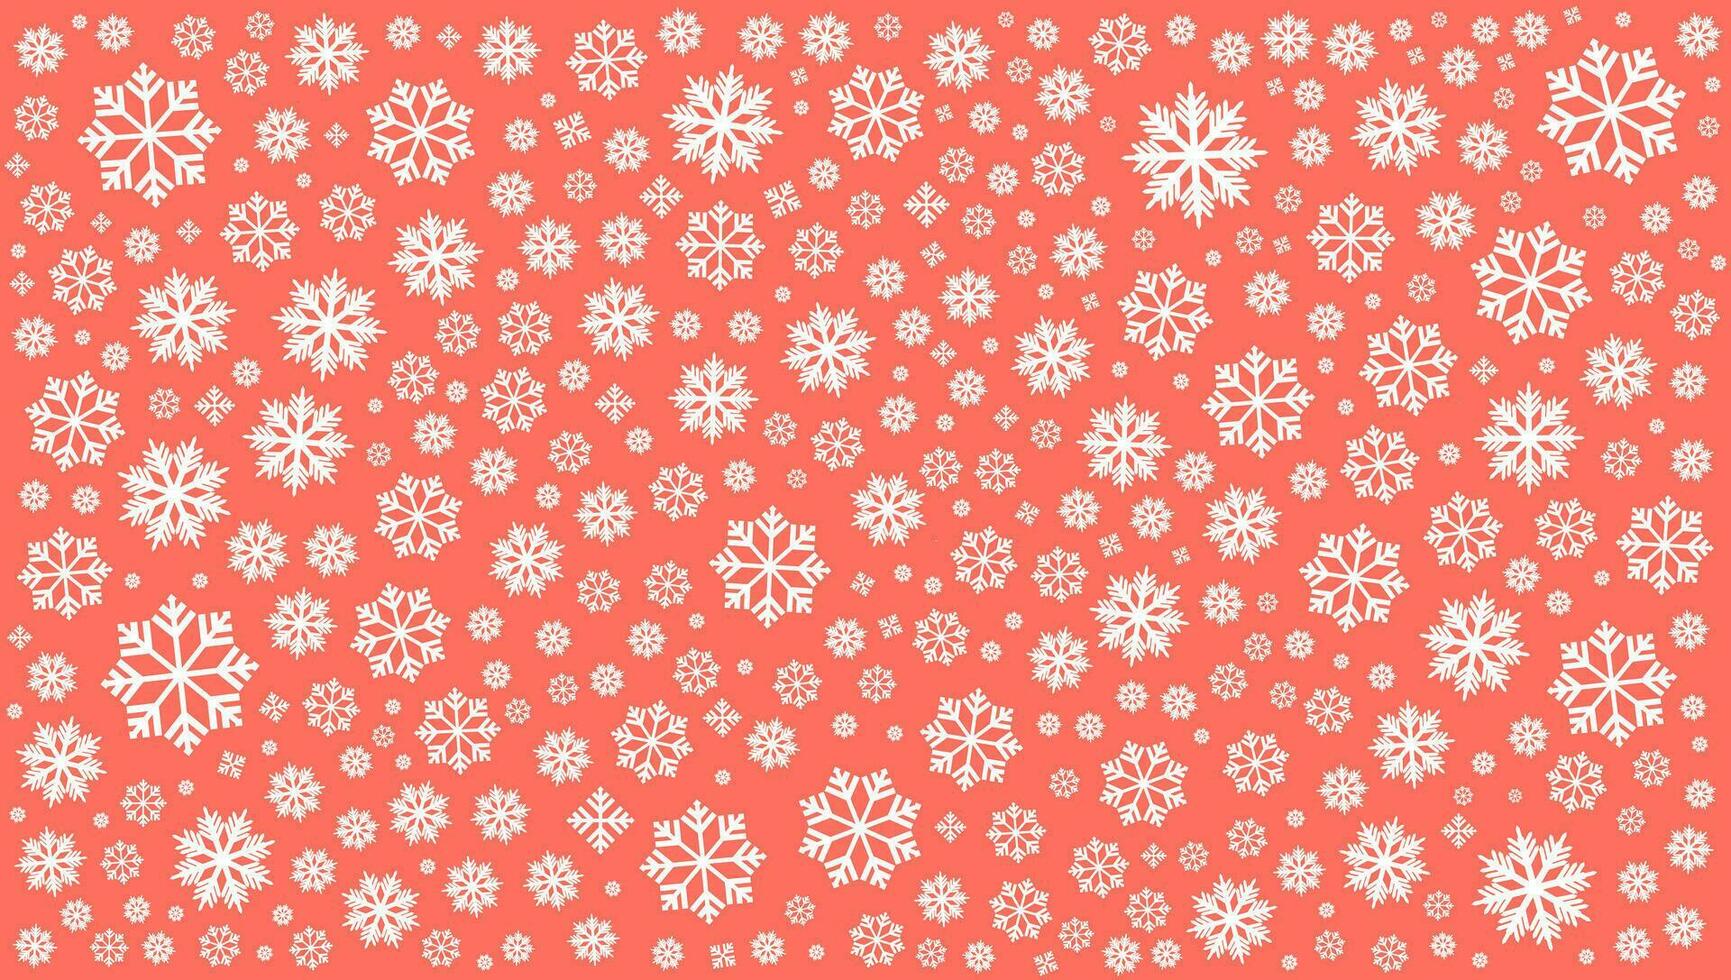 Abstract texture pattern with snowflakes vector